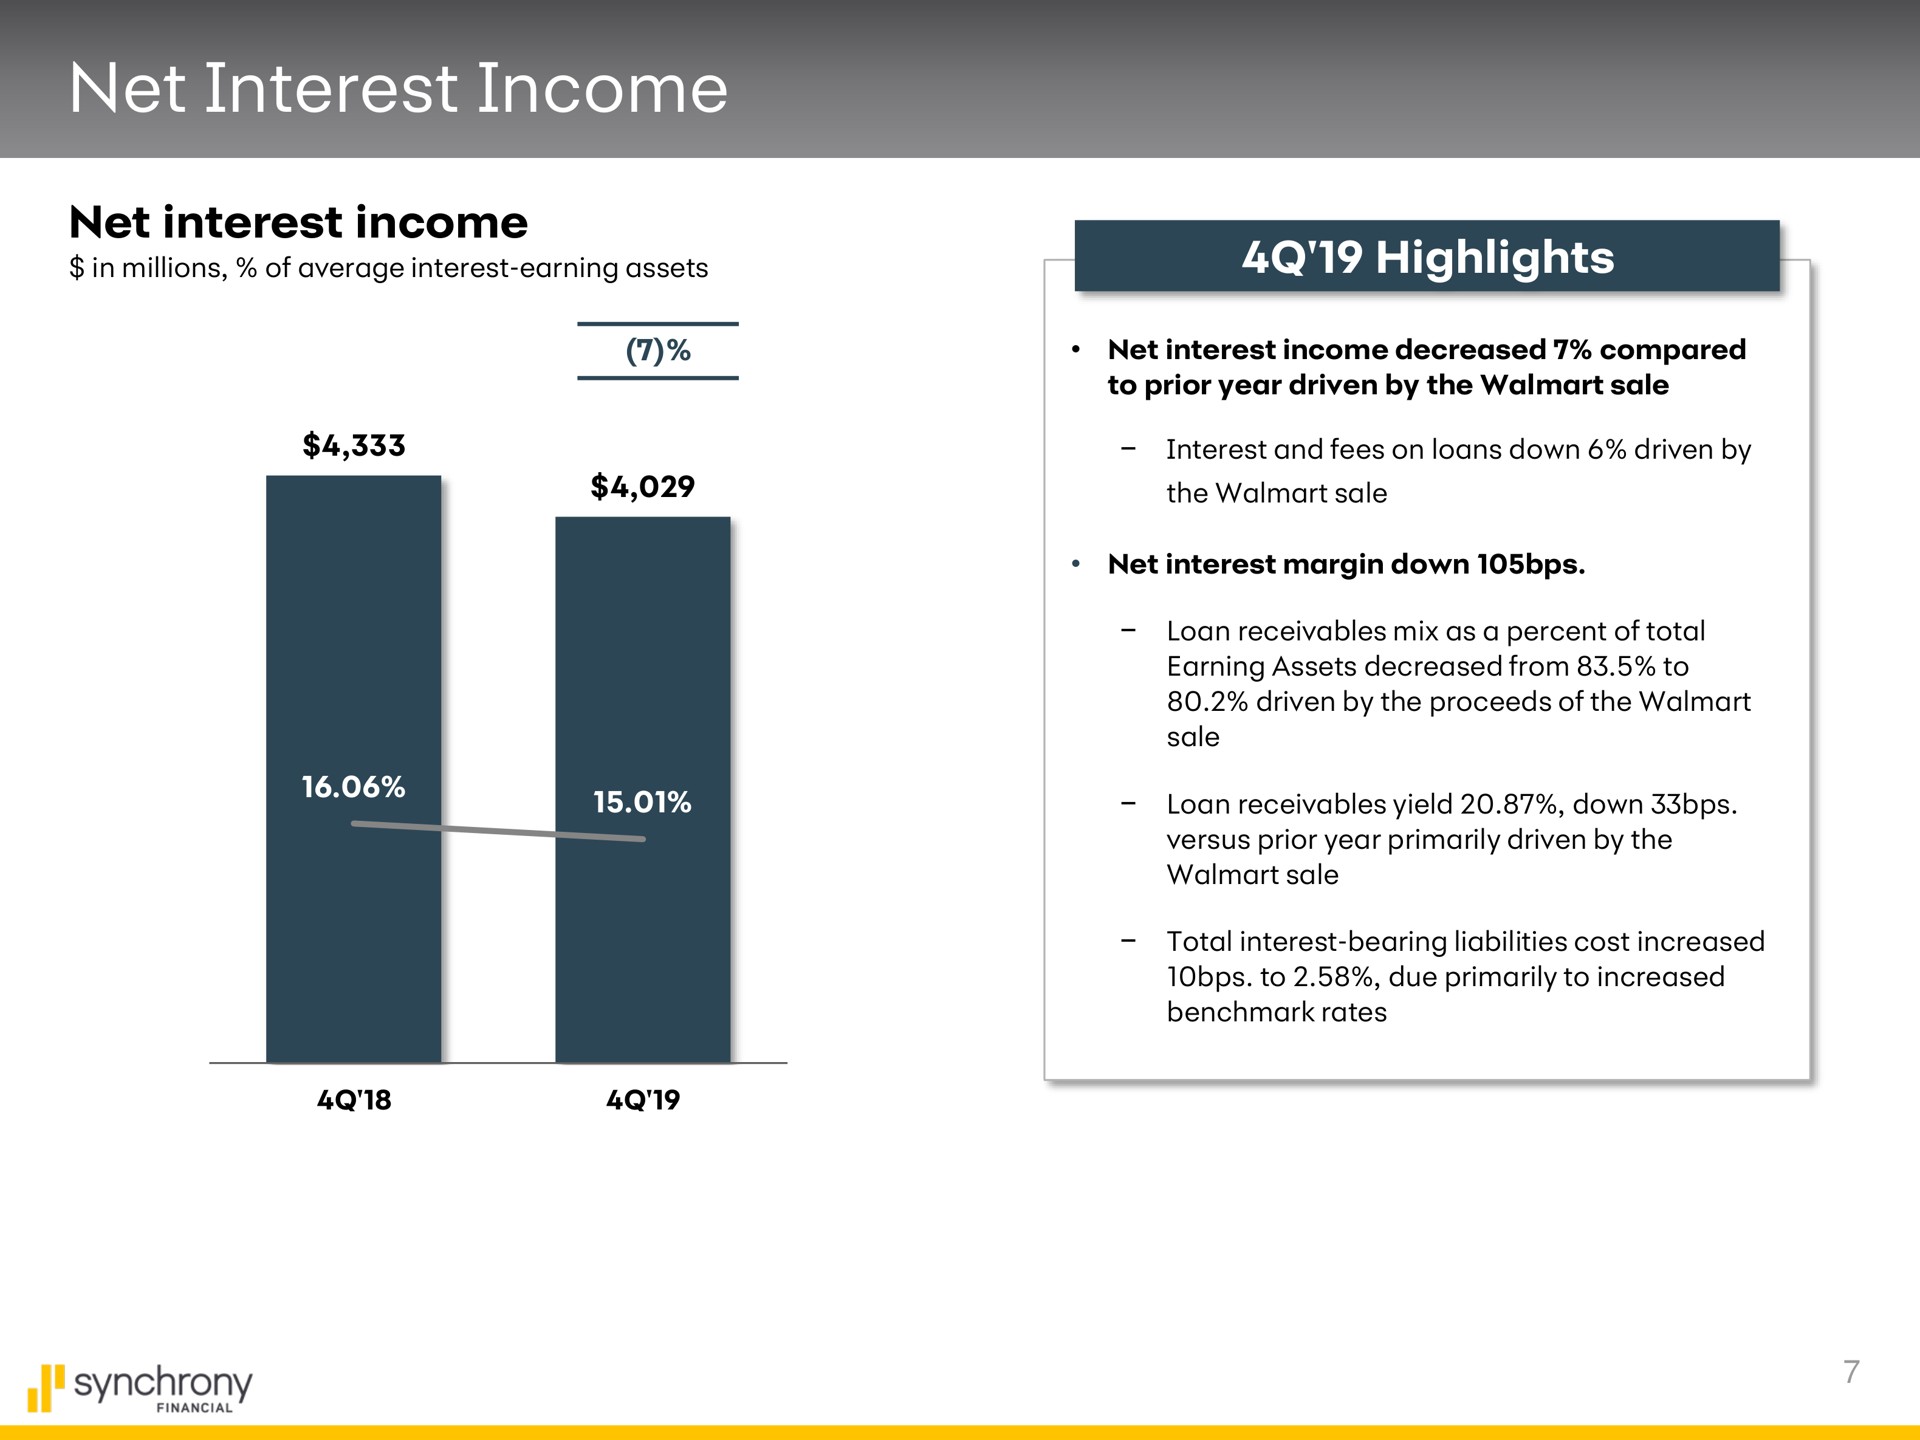 net interest income highlights | Synchrony Financial